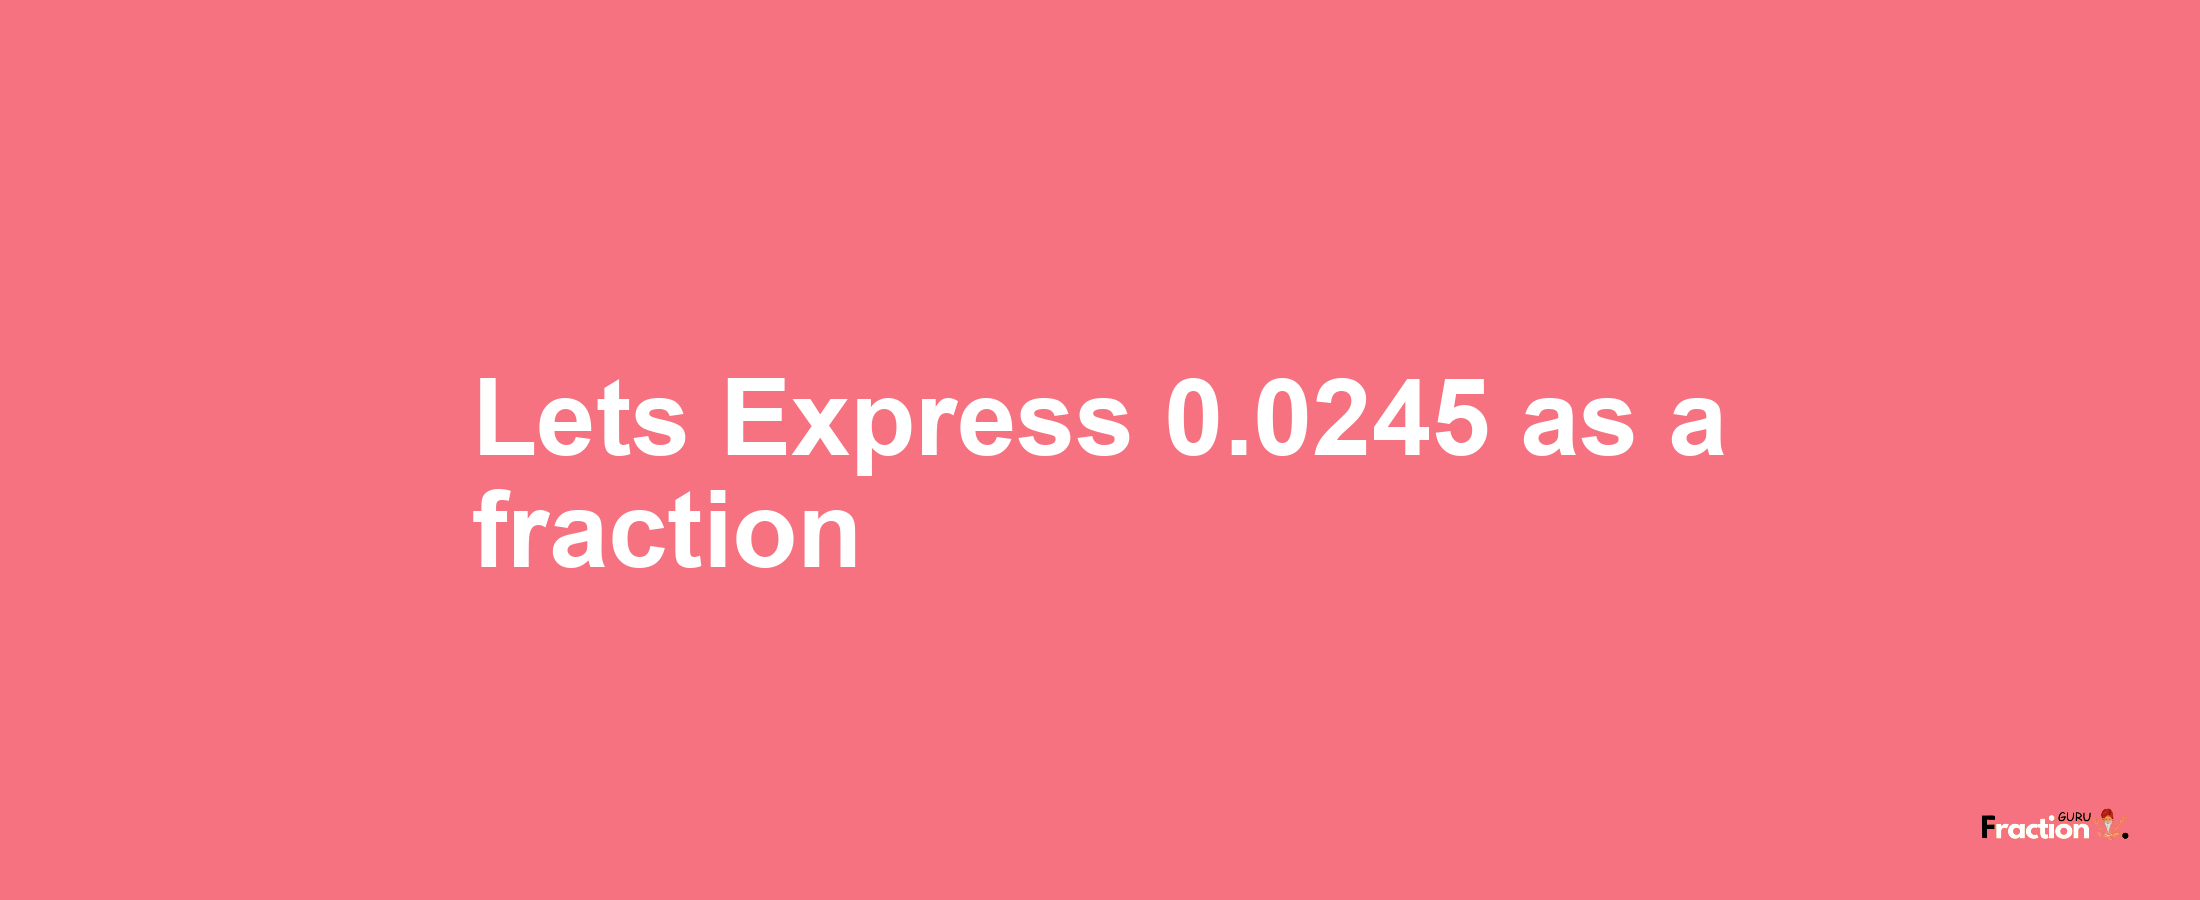 Lets Express 0.0245 as afraction